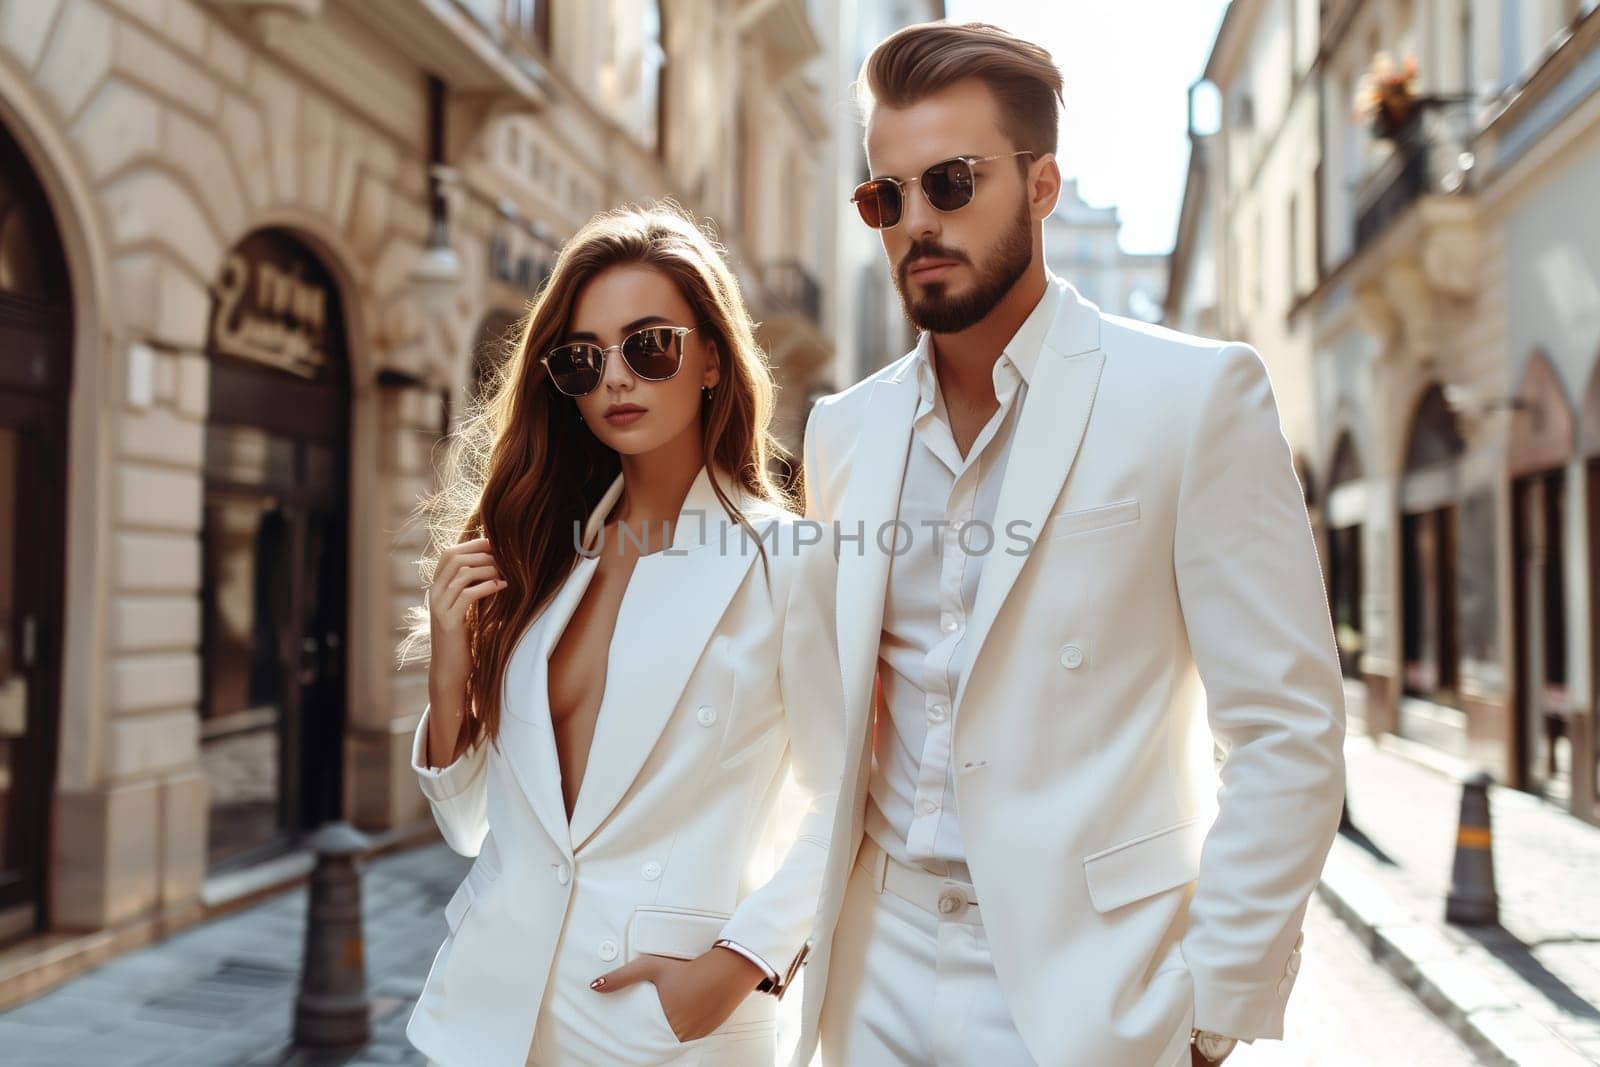 Fashionable portrait of stylish beautiful woman and man in suit in the city, modern young couple posing together on city street